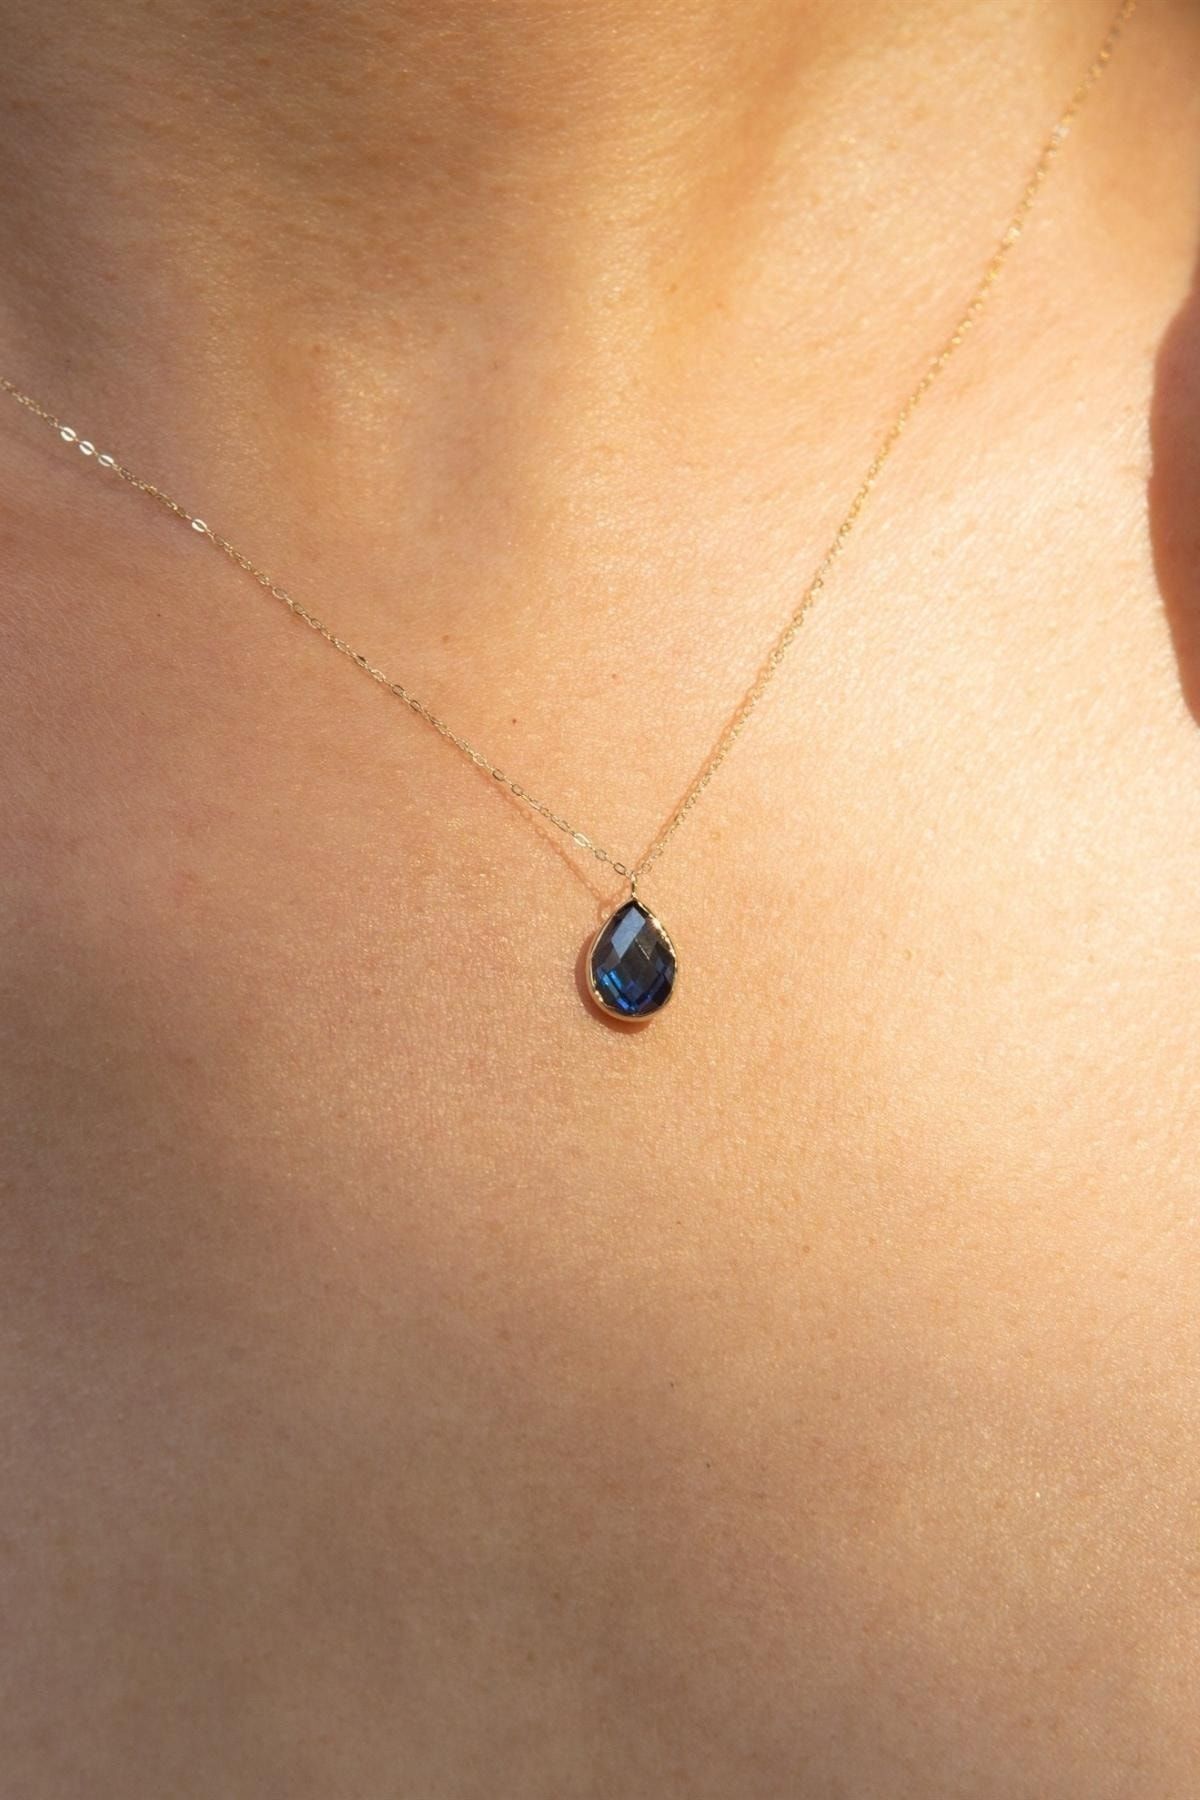 Safir Kuyumculuk 14k Gold Navy Blue Natural Stone Necklace - stylish and suitable for everyday use